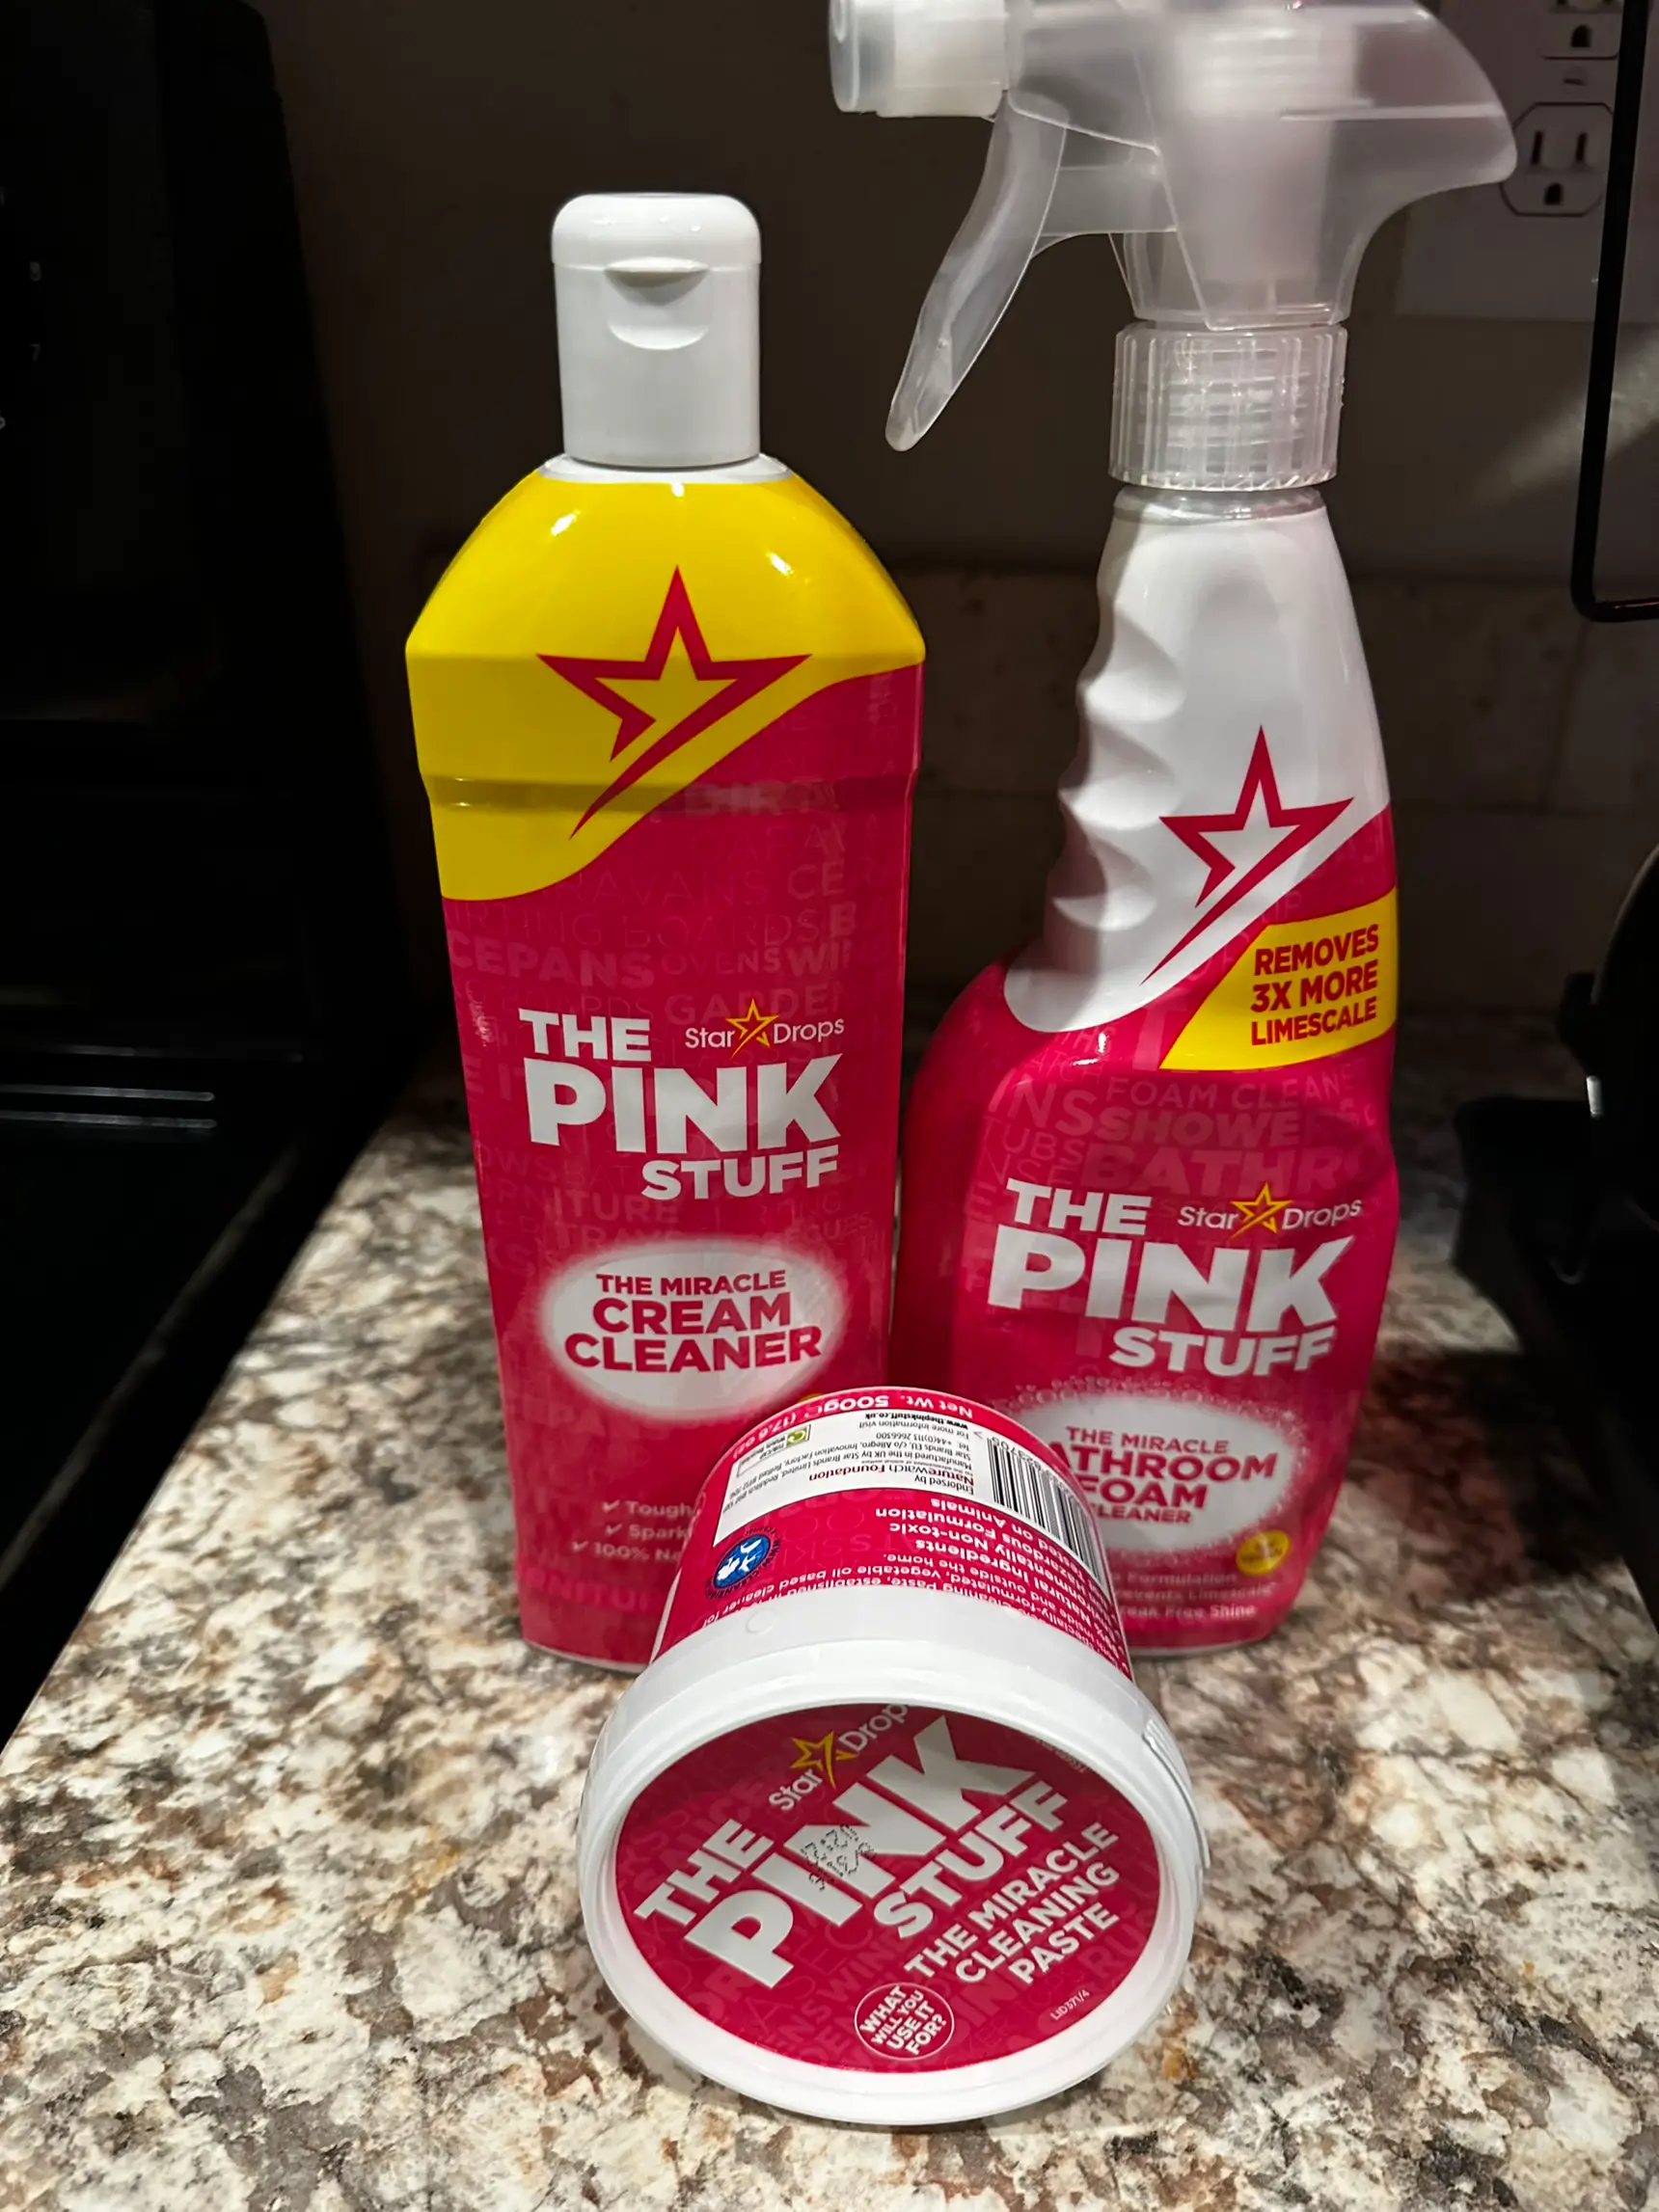 Stardrops - The Pink Stuff - The Miracle Power Foaming Toilet Cleaner - 2  Treatments - Self Activating Pink Foam